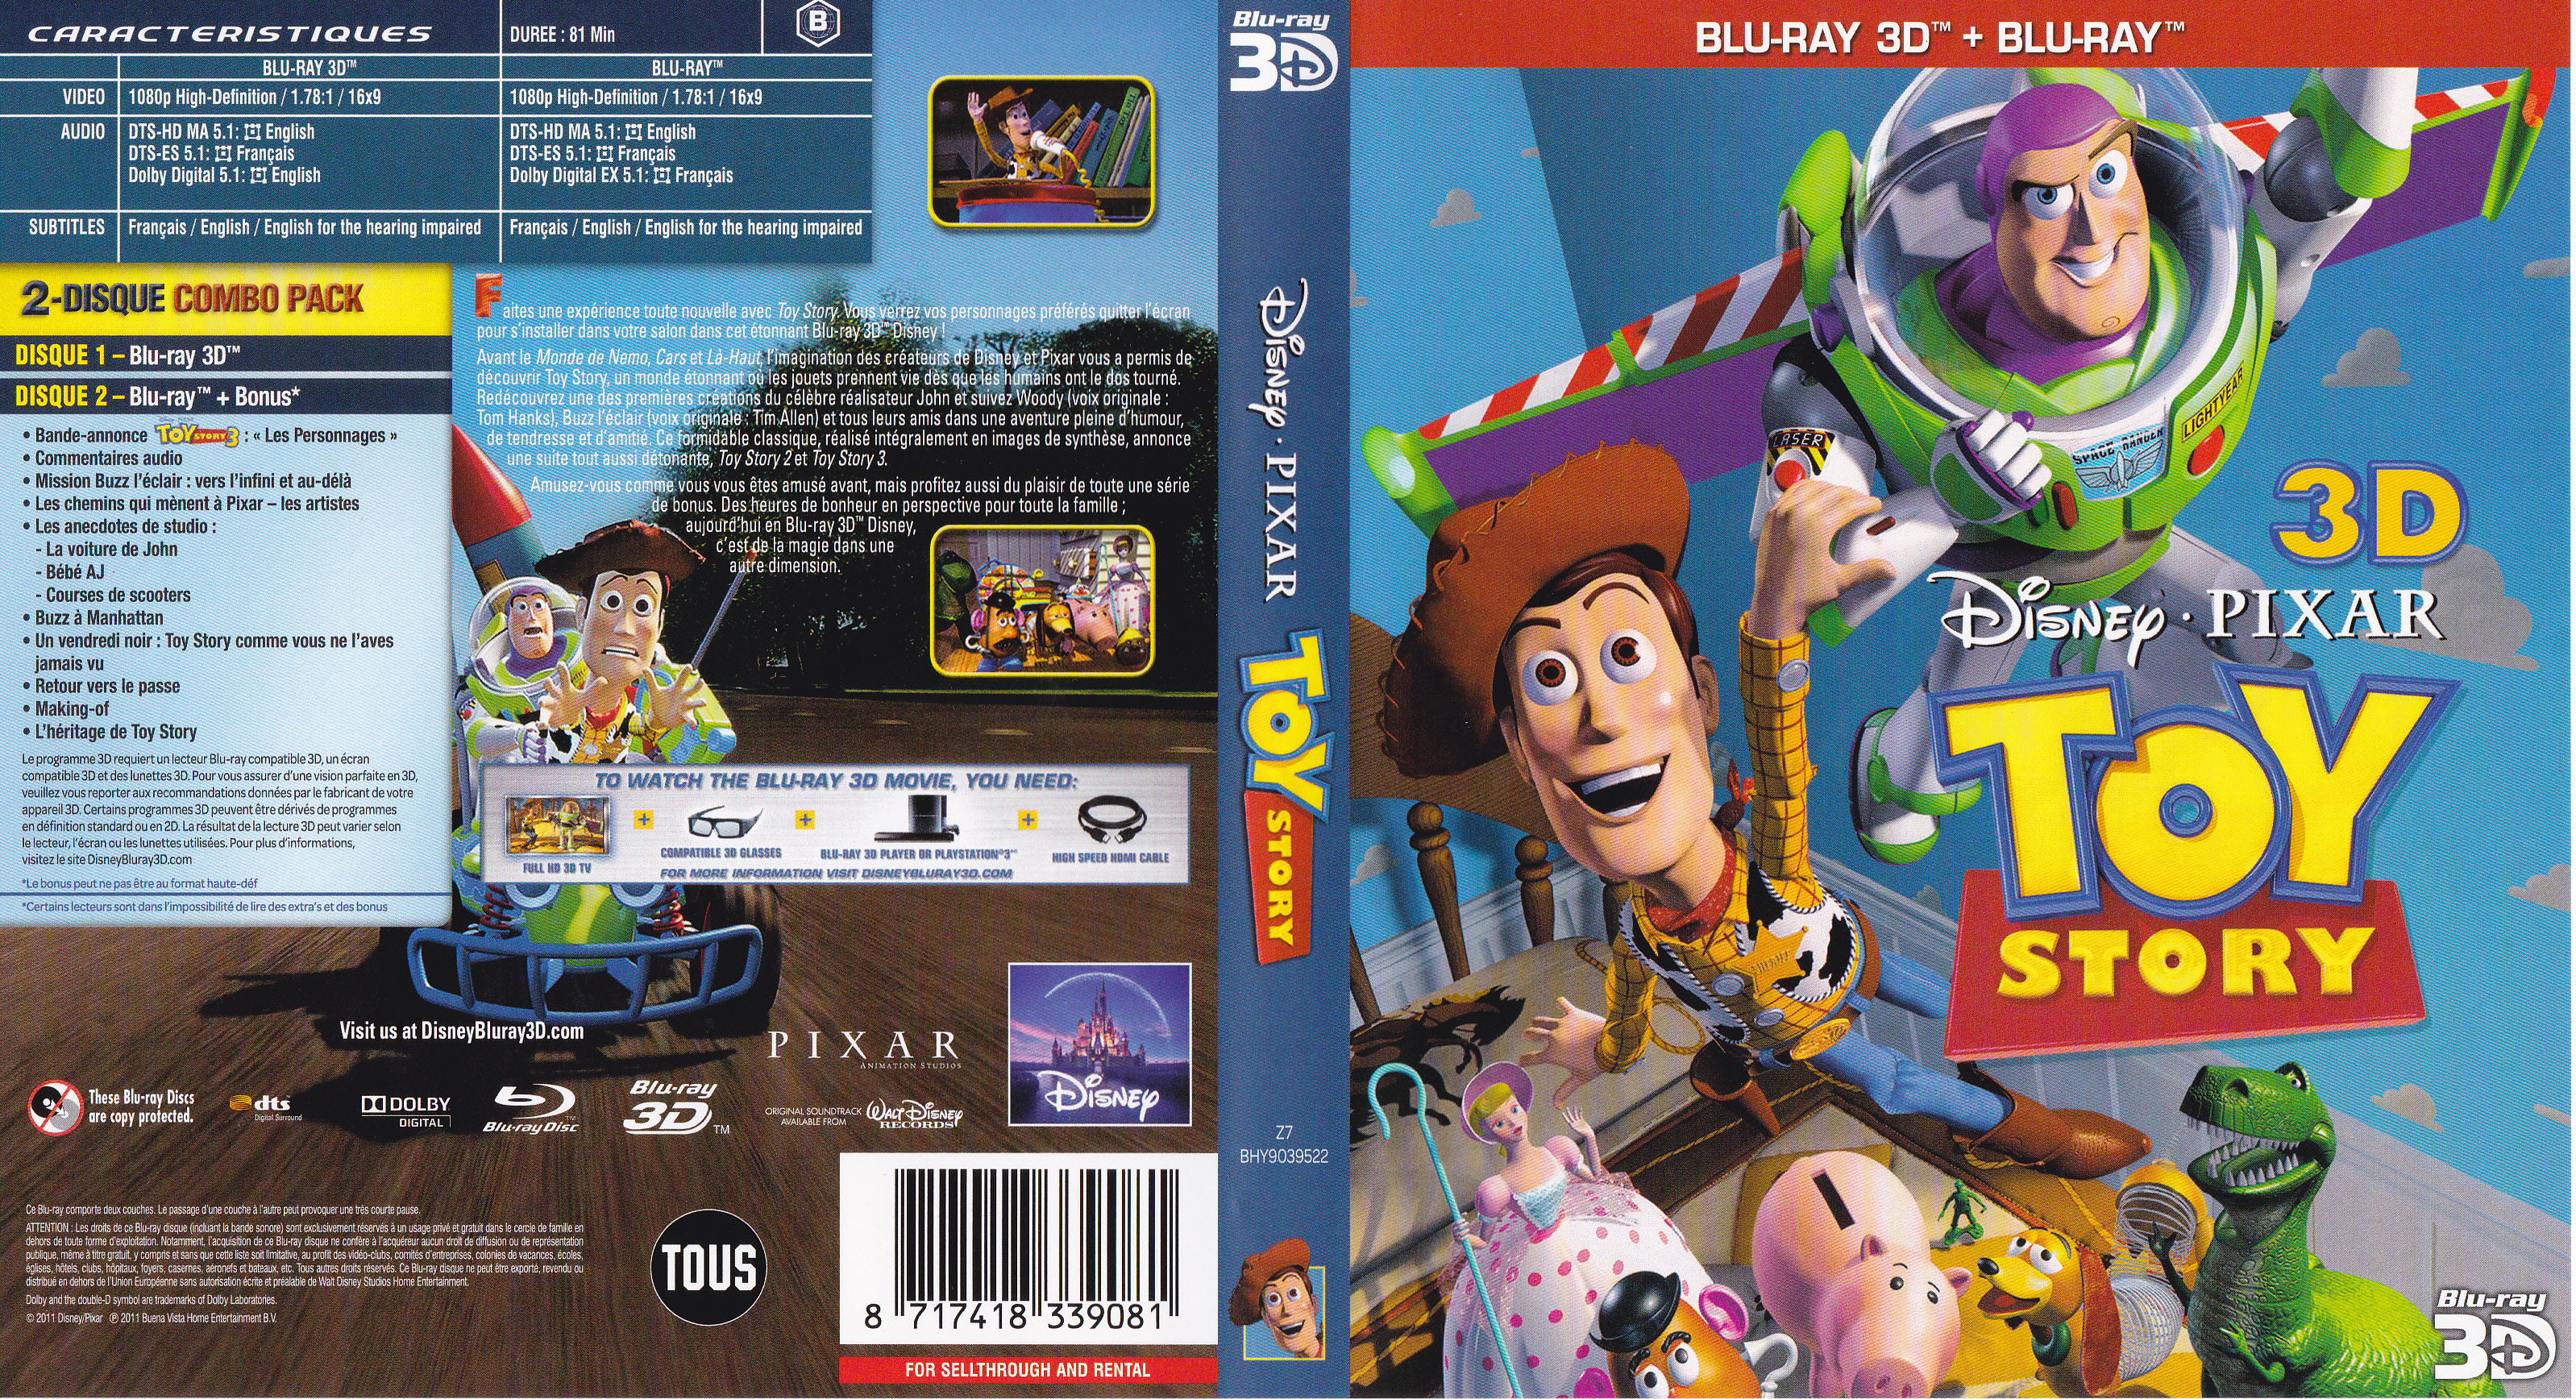 Jaquette DVD Toy Story (BLU-RAY) v2